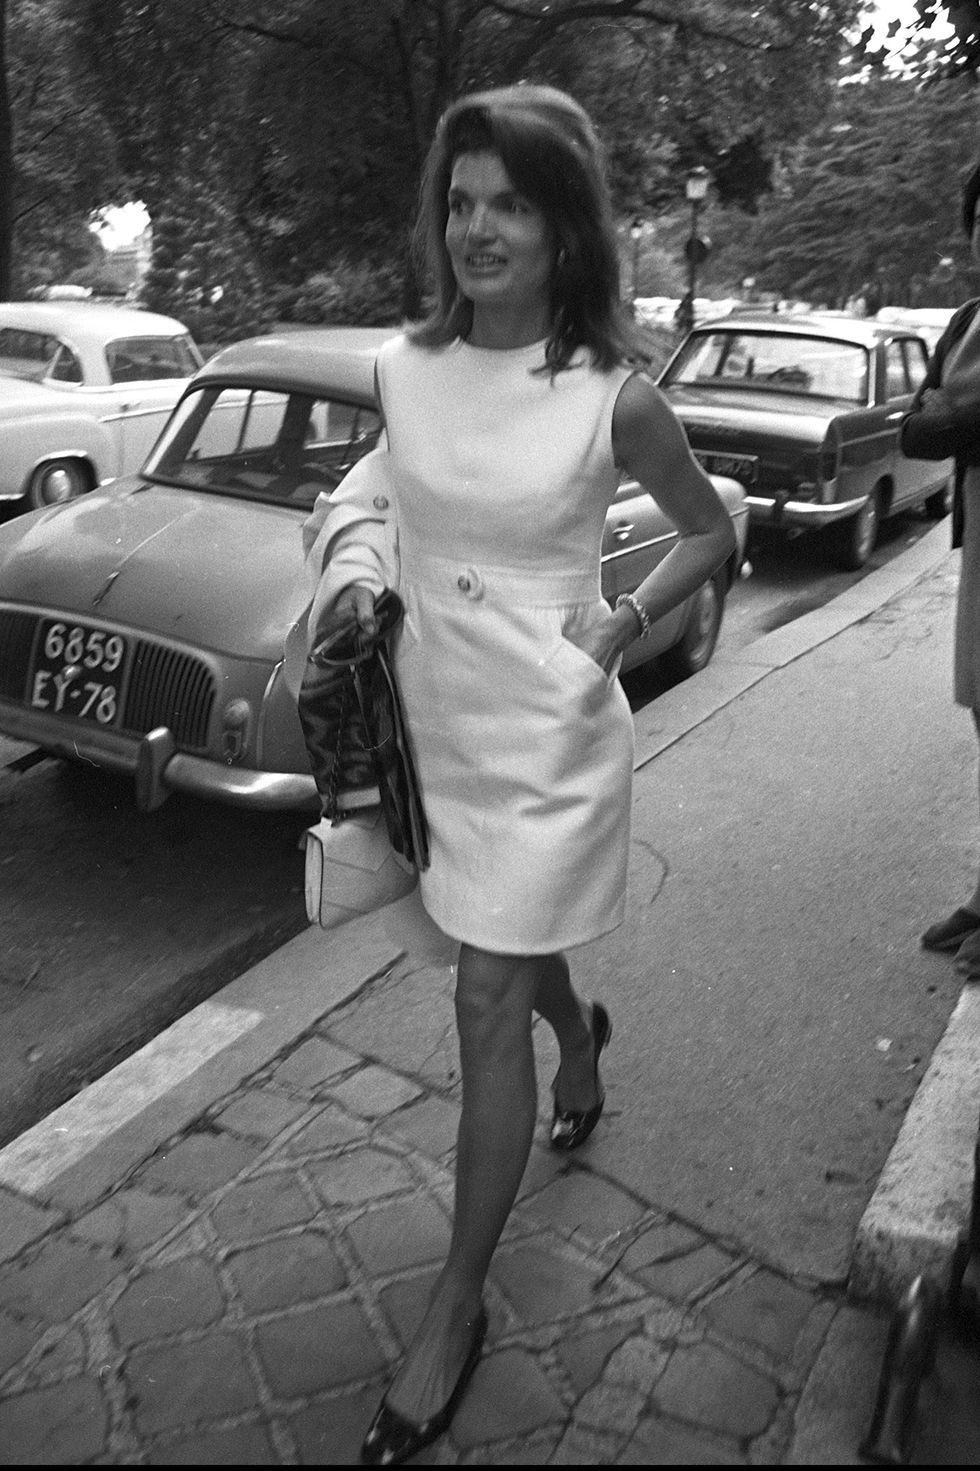 jackie and aristote onassis in paris, france on june 23, 1969